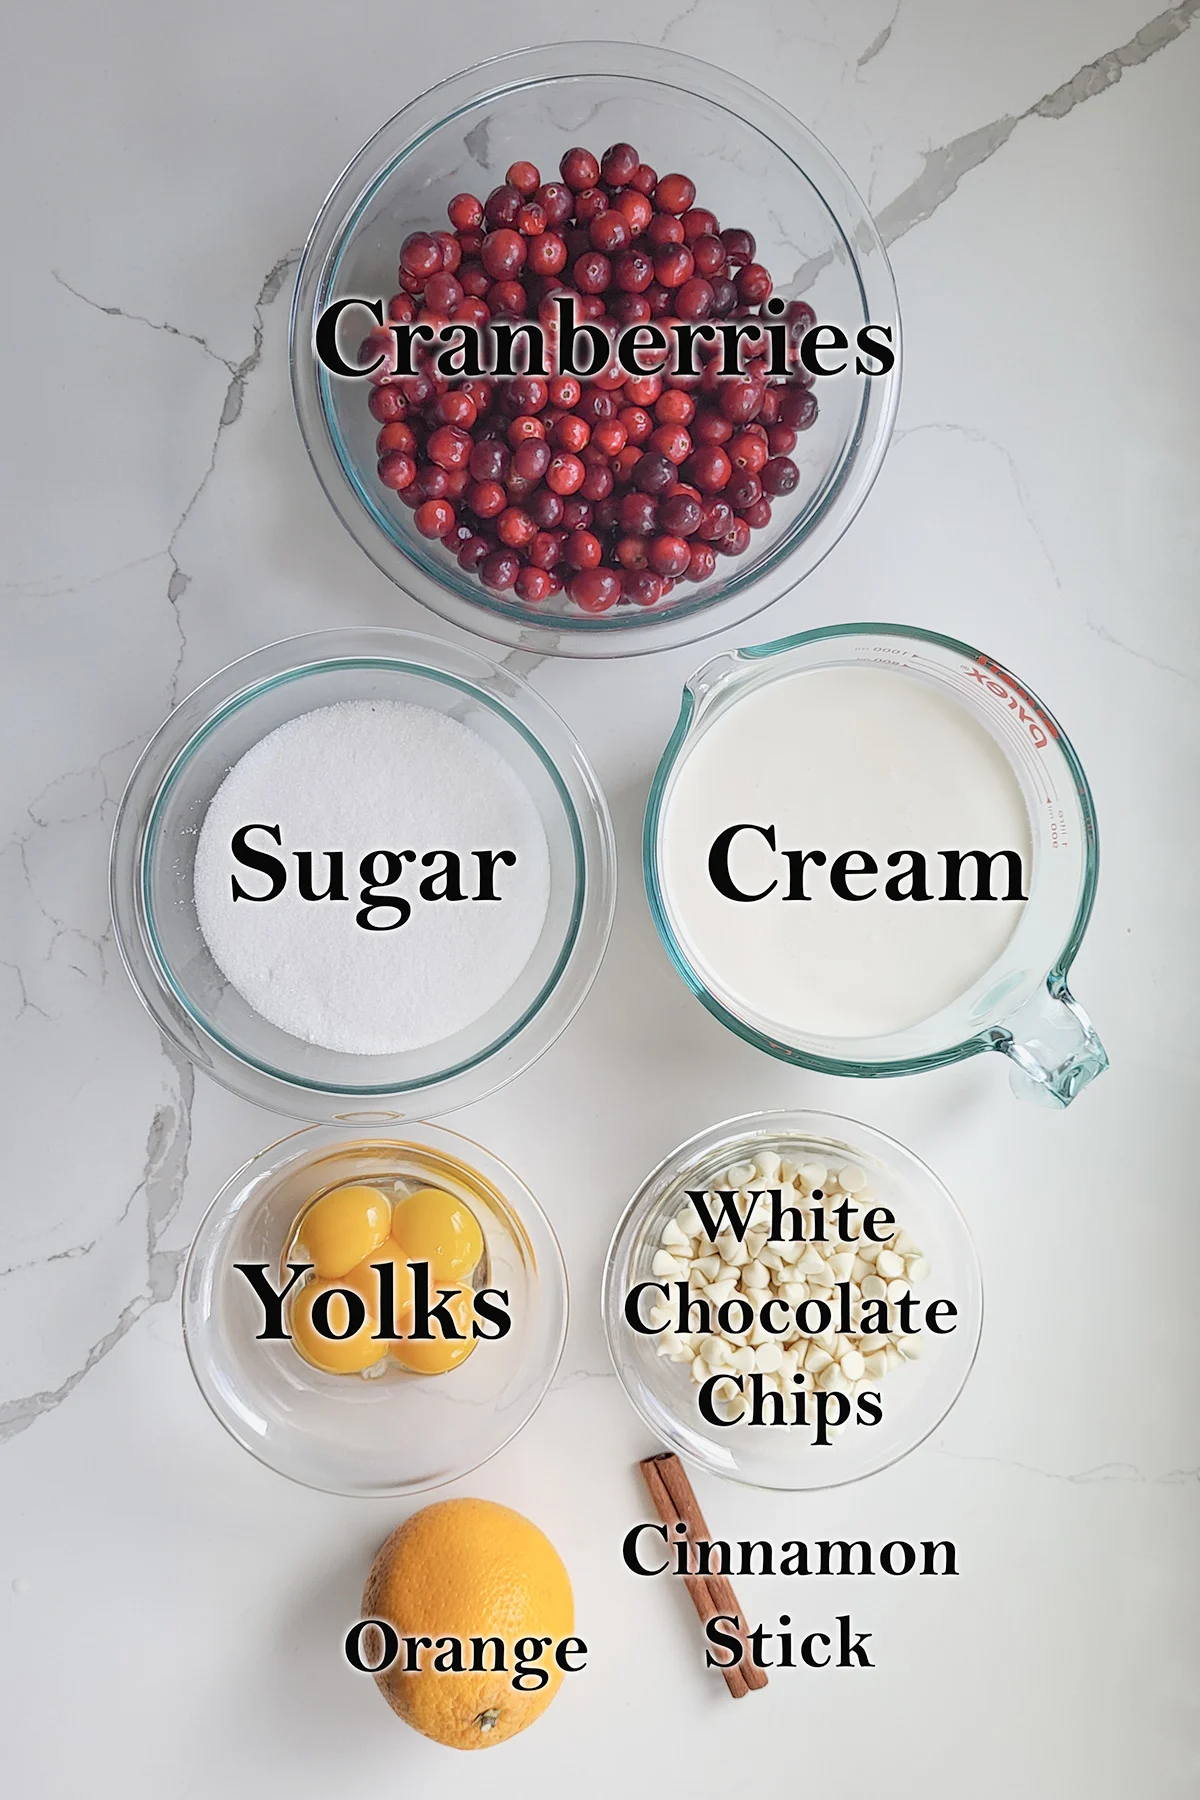 ingredients for cranberry ice cream in glass bowls on a white surface.